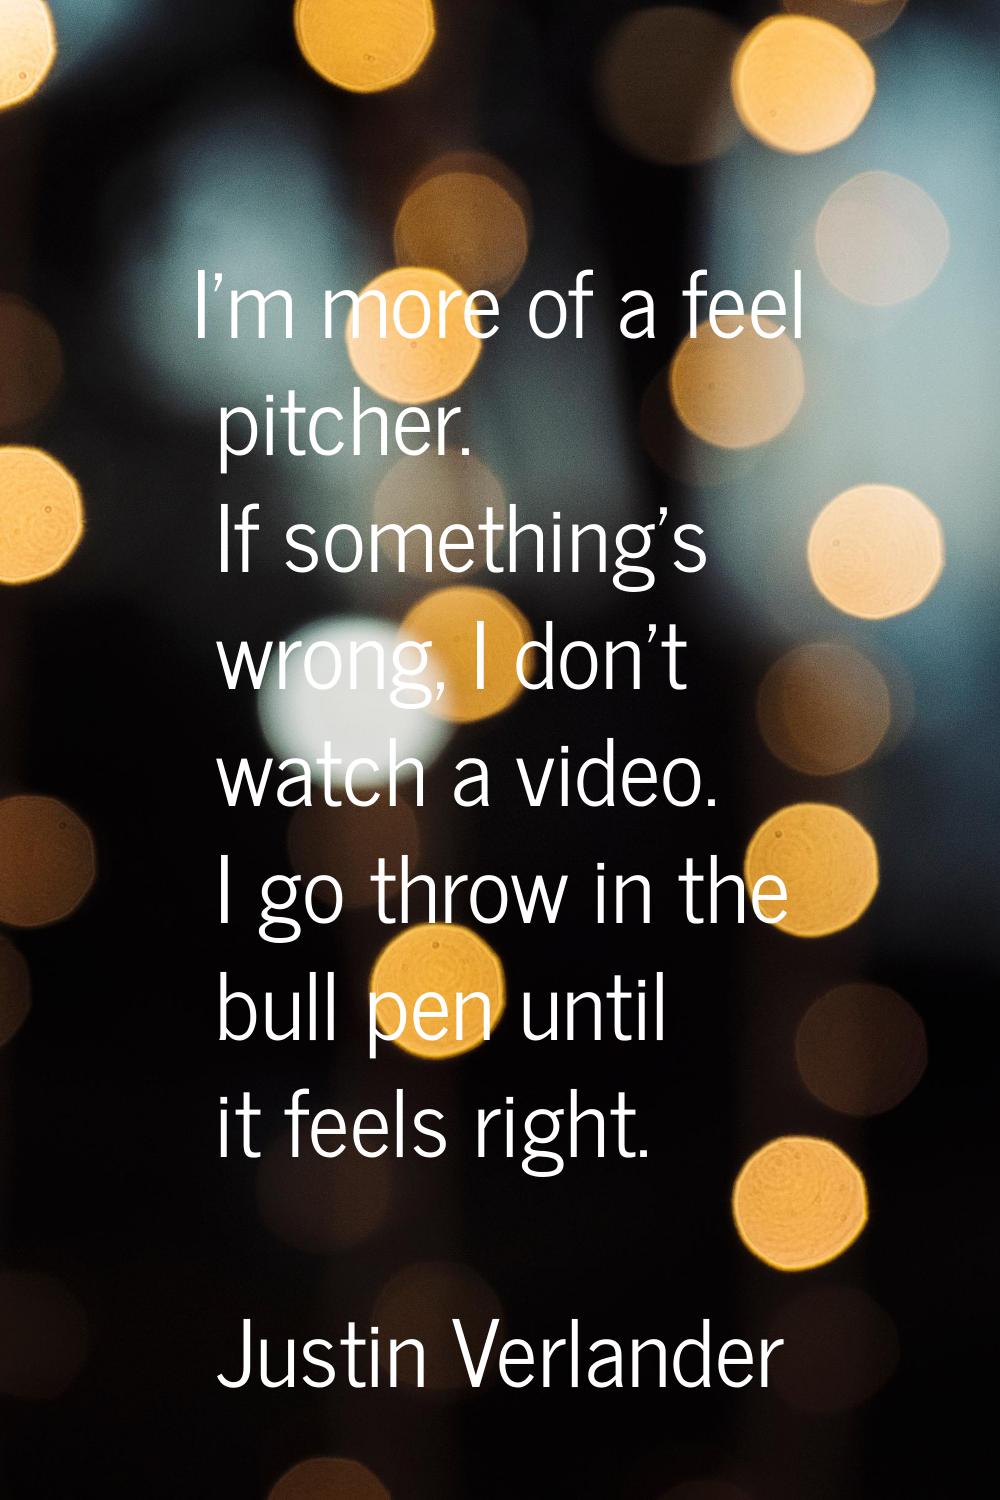 I'm more of a feel pitcher. If something's wrong, I don't watch a video. I go throw in the bull pen